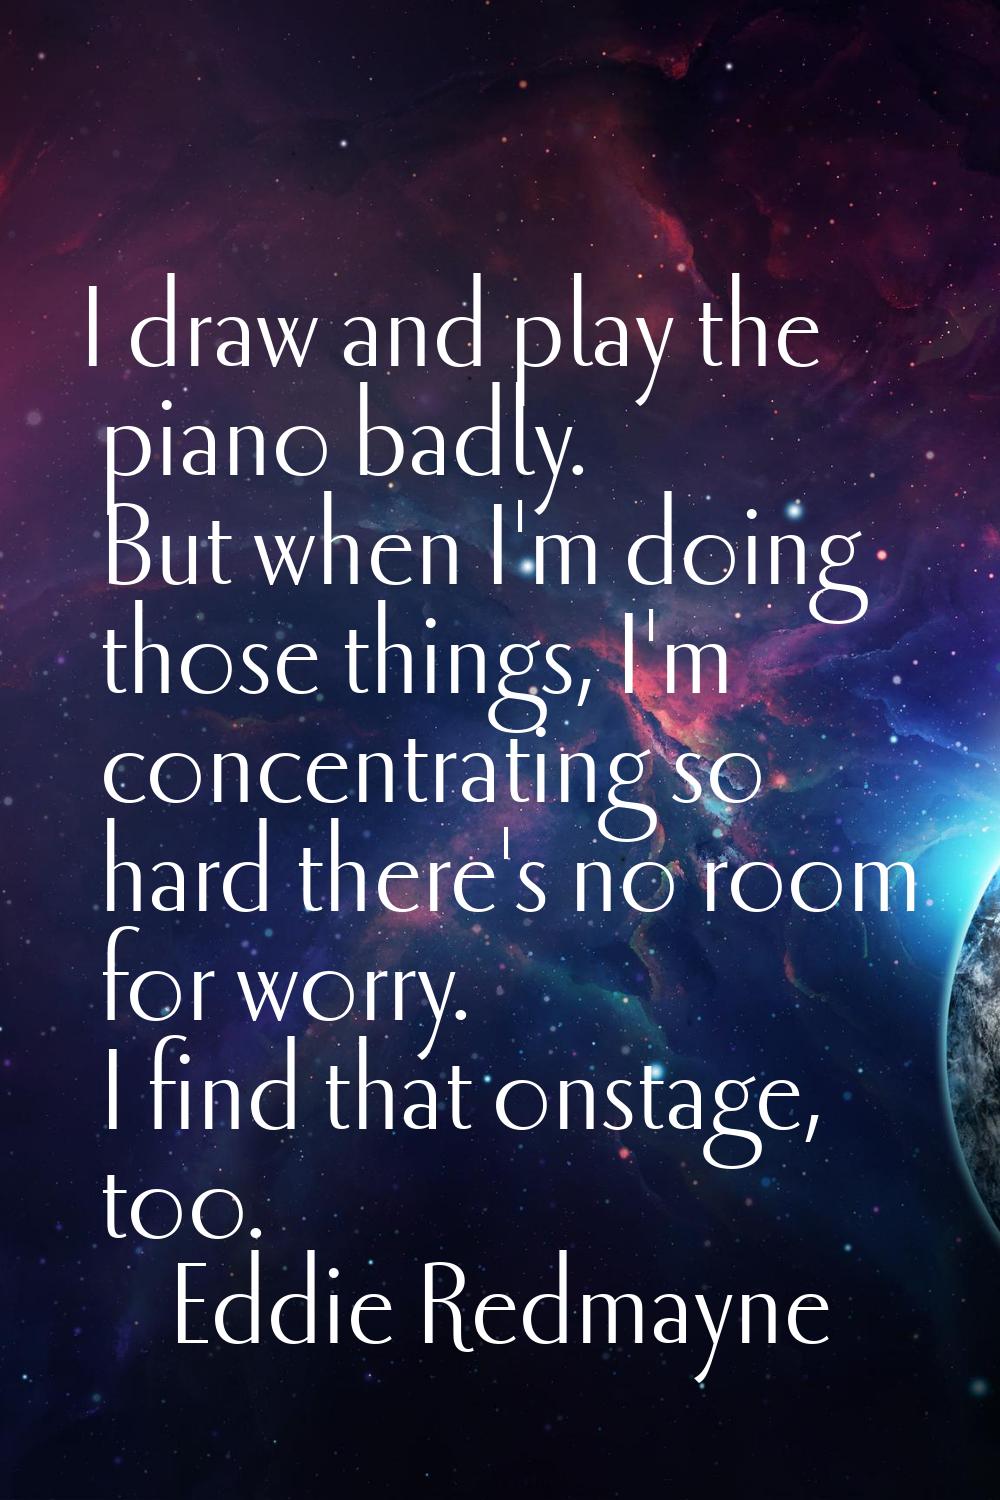 I draw and play the piano badly. But when I'm doing those things, I'm concentrating so hard there's